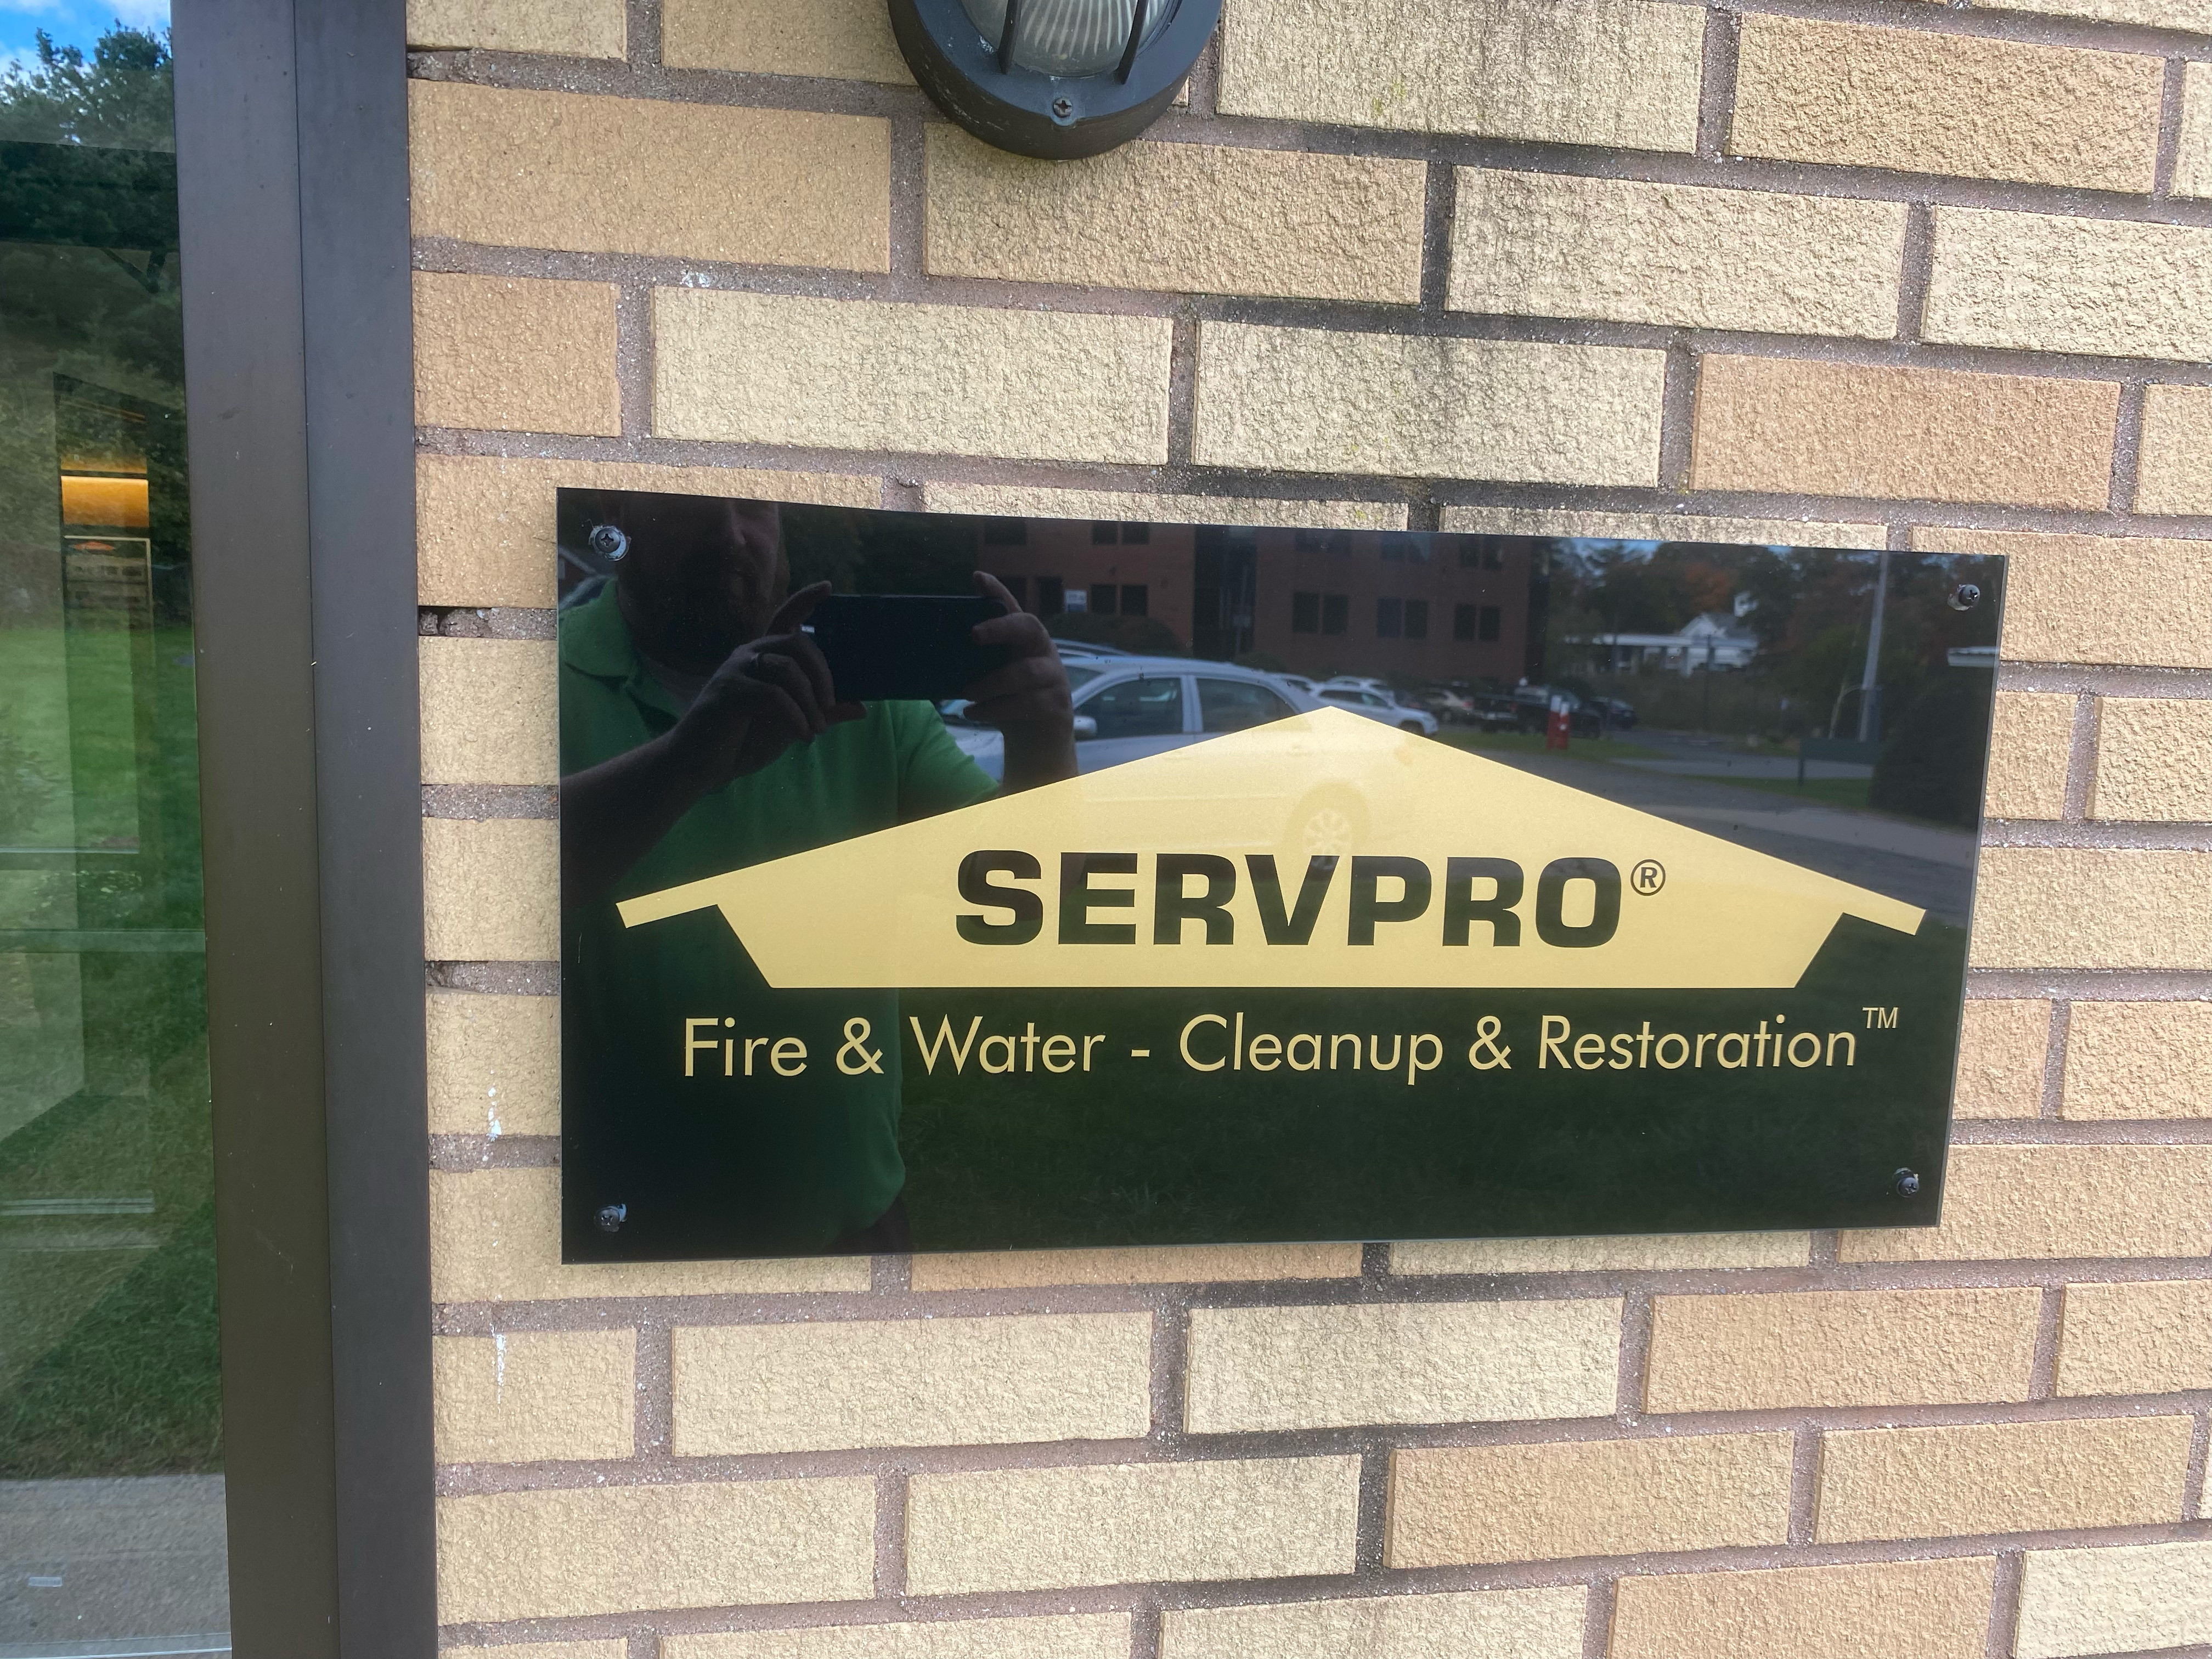 When disaster strikes your residential or commercial property you need experts to guide you through the process of making it "Like it never even happened." SERVPRO of Foxborough does exactly that not only for the Foxborough community but also the surrounding communities of Franklin, Millis, Wrentham, Bellingham, Walpole, Norfolk and Wethersfield.